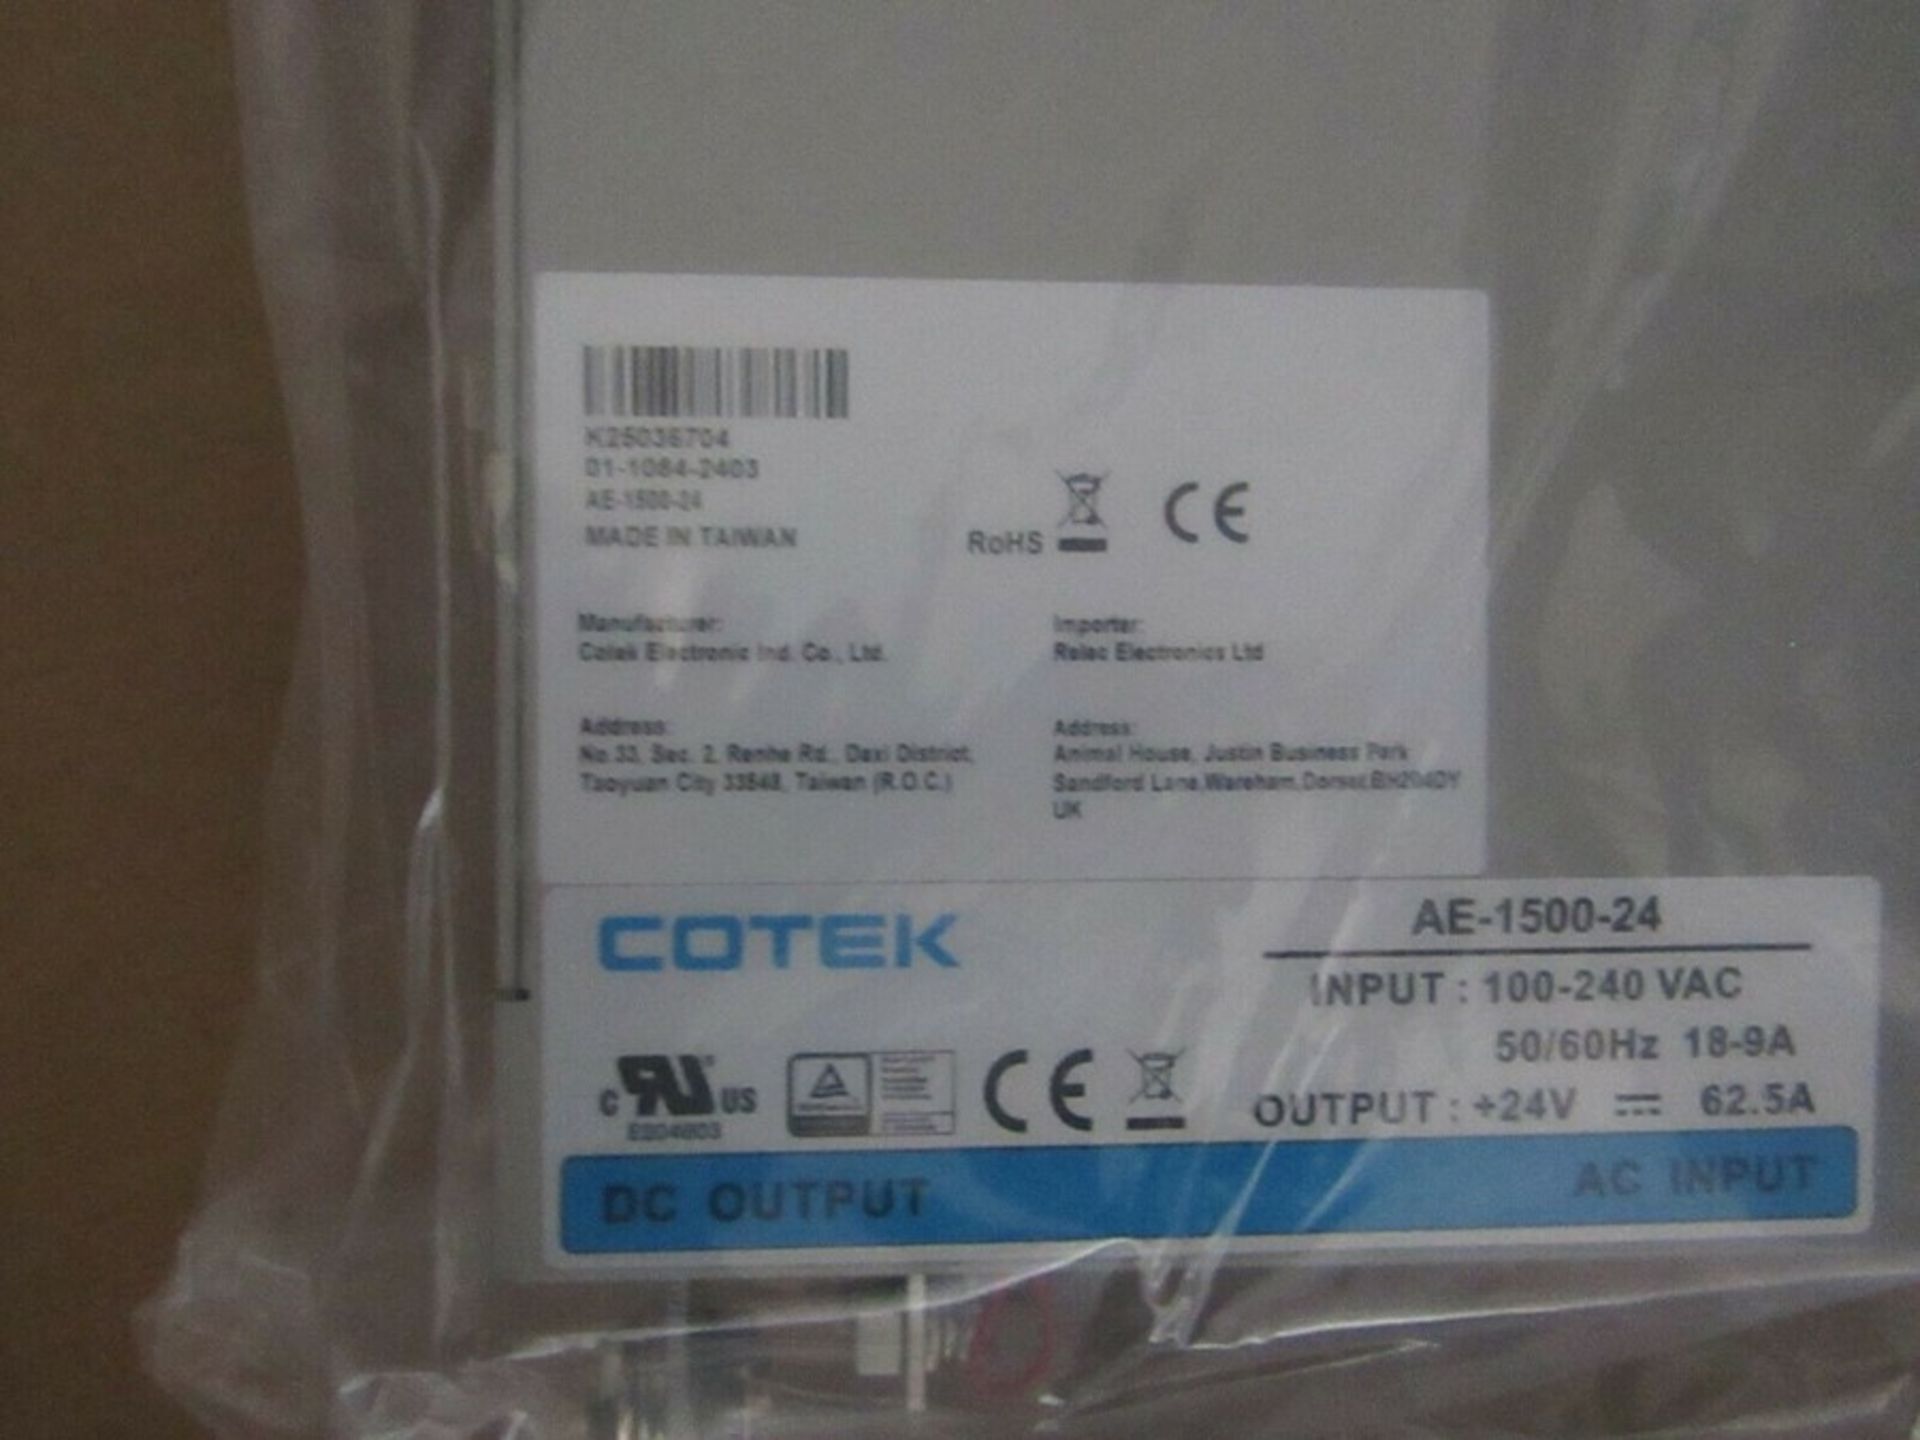 10 x COTEK, 1.5kW Embedded Switch Mode Power Supply SMPS, 24V dc, Enclosed - AE-1500-24 - £12k at co - Image 2 of 3